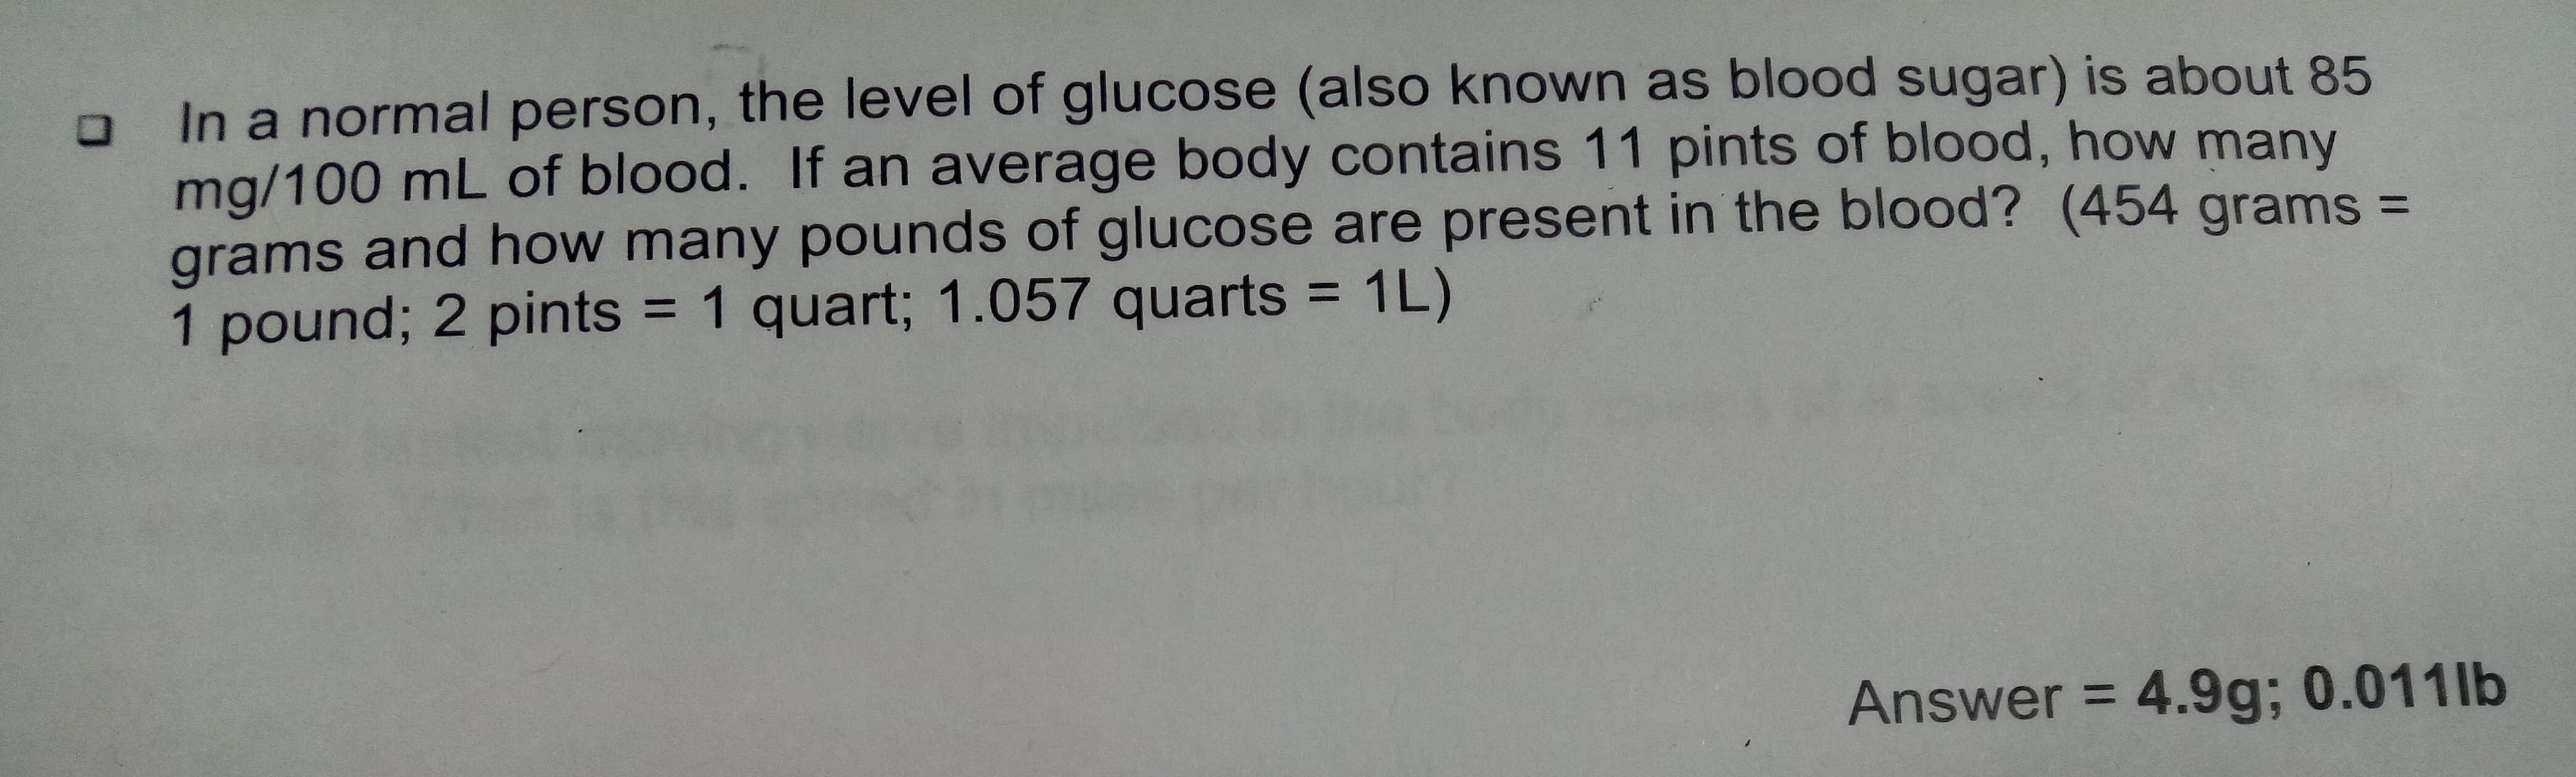 In a normal person, the level of glucose (also known as blood sugar) is about 85
mg/100 mL of blood. If an average body contains 11 pints of blood, how many
grams and how many pounds of glucose are present in the blood? (454 grams =
pound; 2 pints = 1 quart; 1.057 quarts 1L)
1
Answer 4.9g; 0.011 lb
